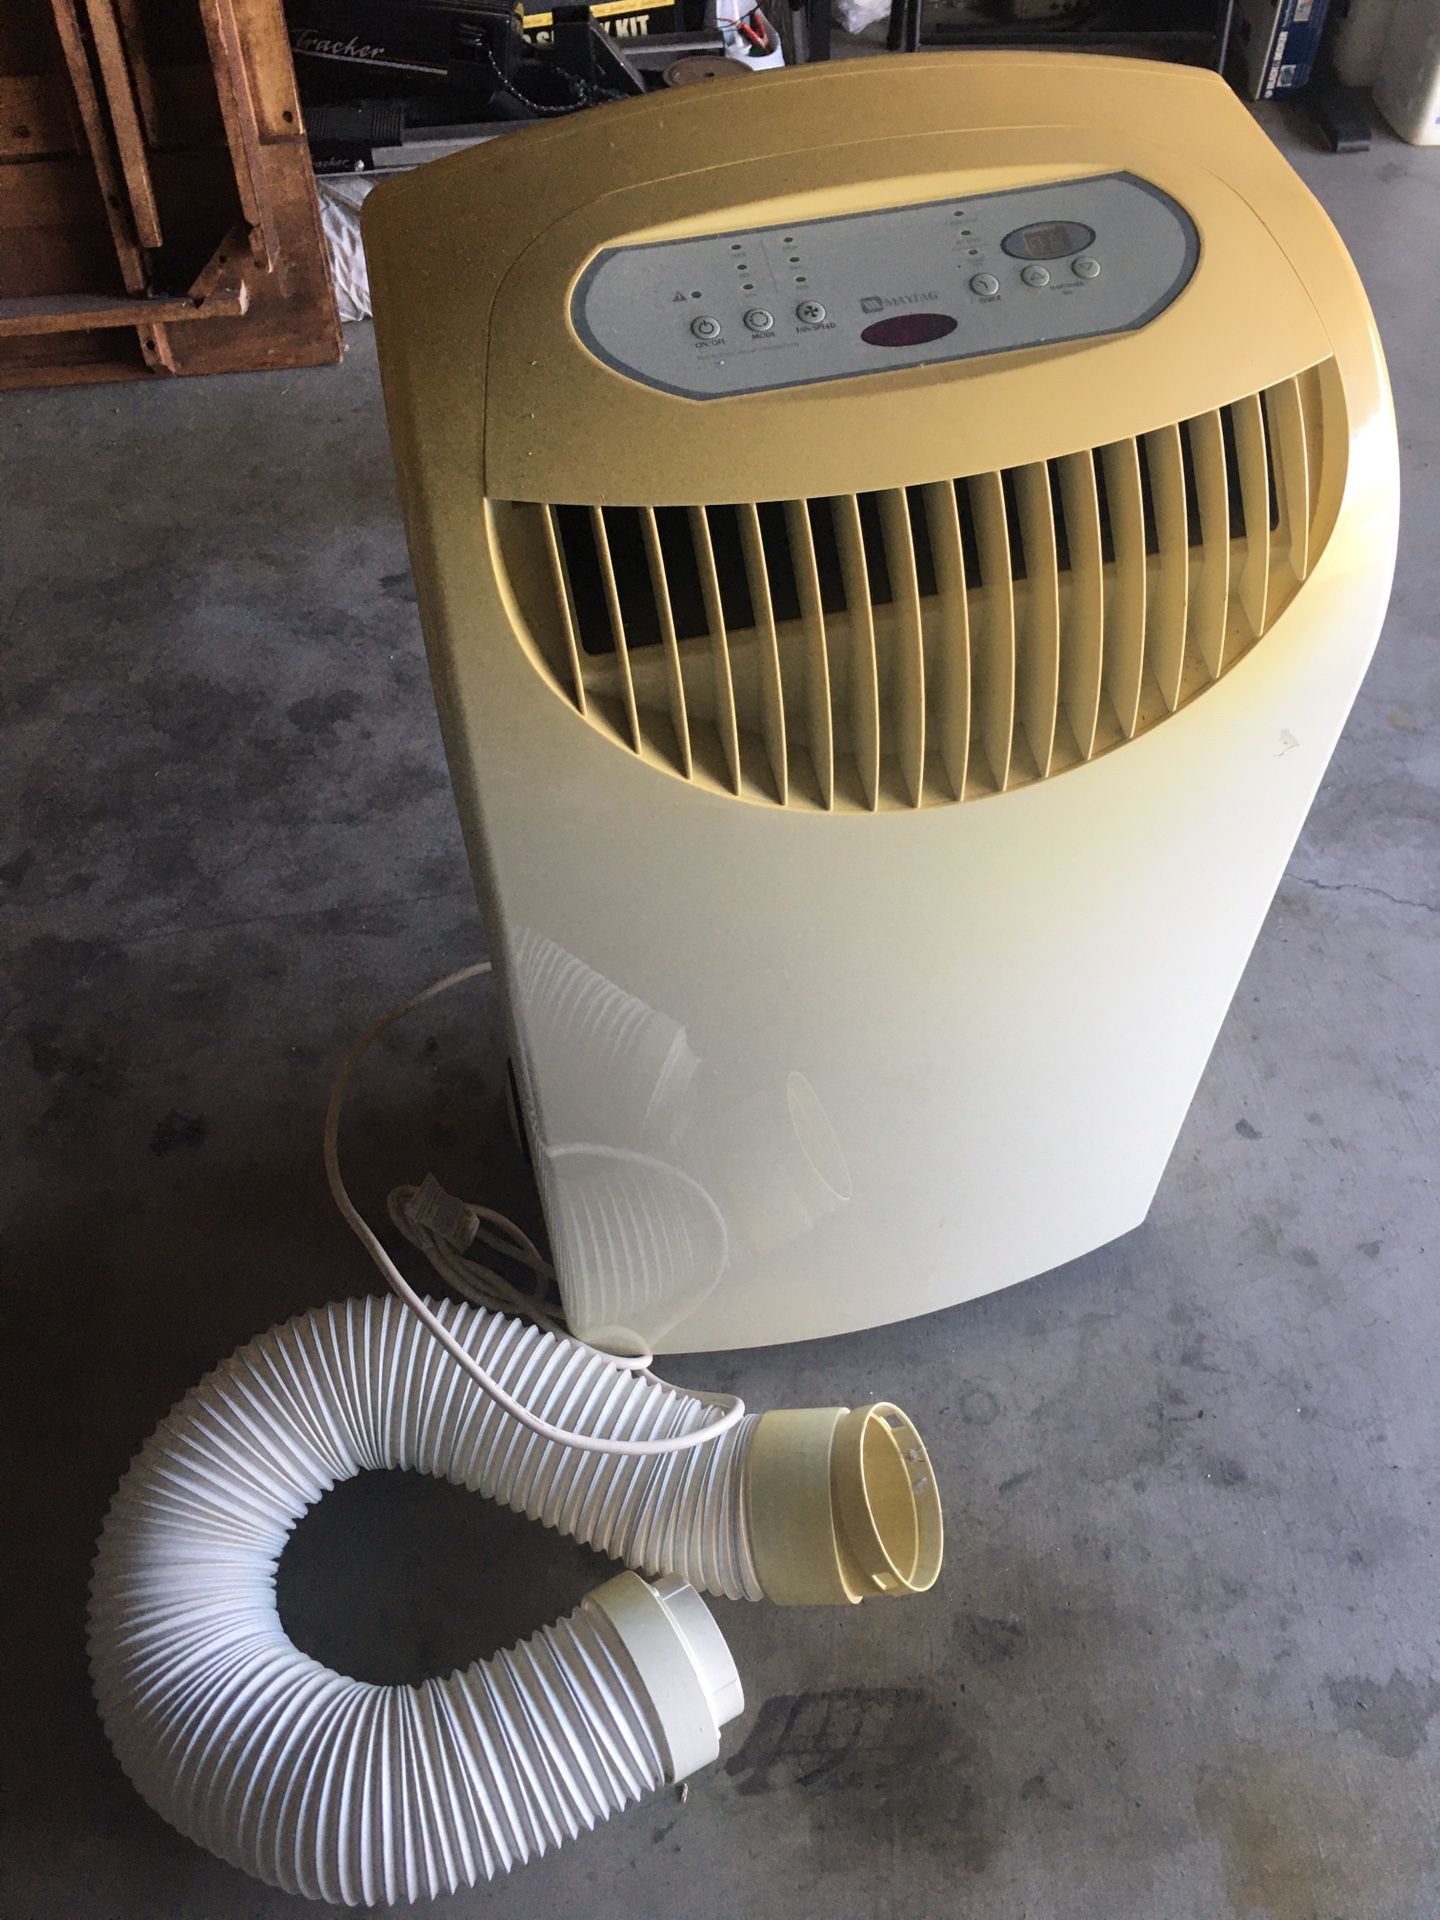 Black And Decker Portable Air Conditioner 8,000 BTU for Sale in Sunnyvale,  CA - OfferUp